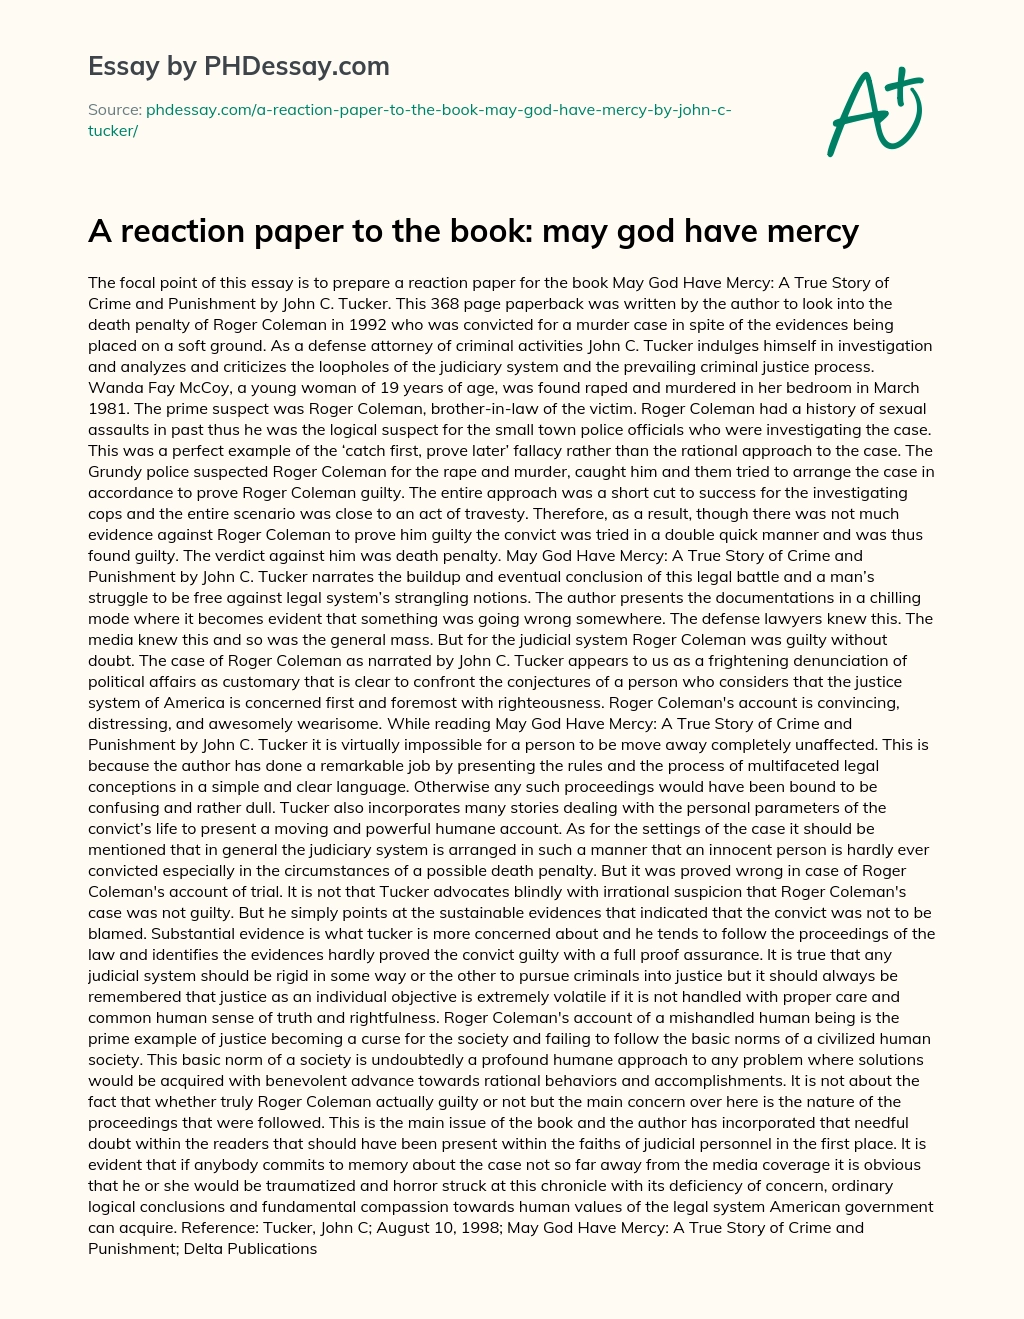 A reaction paper to the book: may god have mercy essay